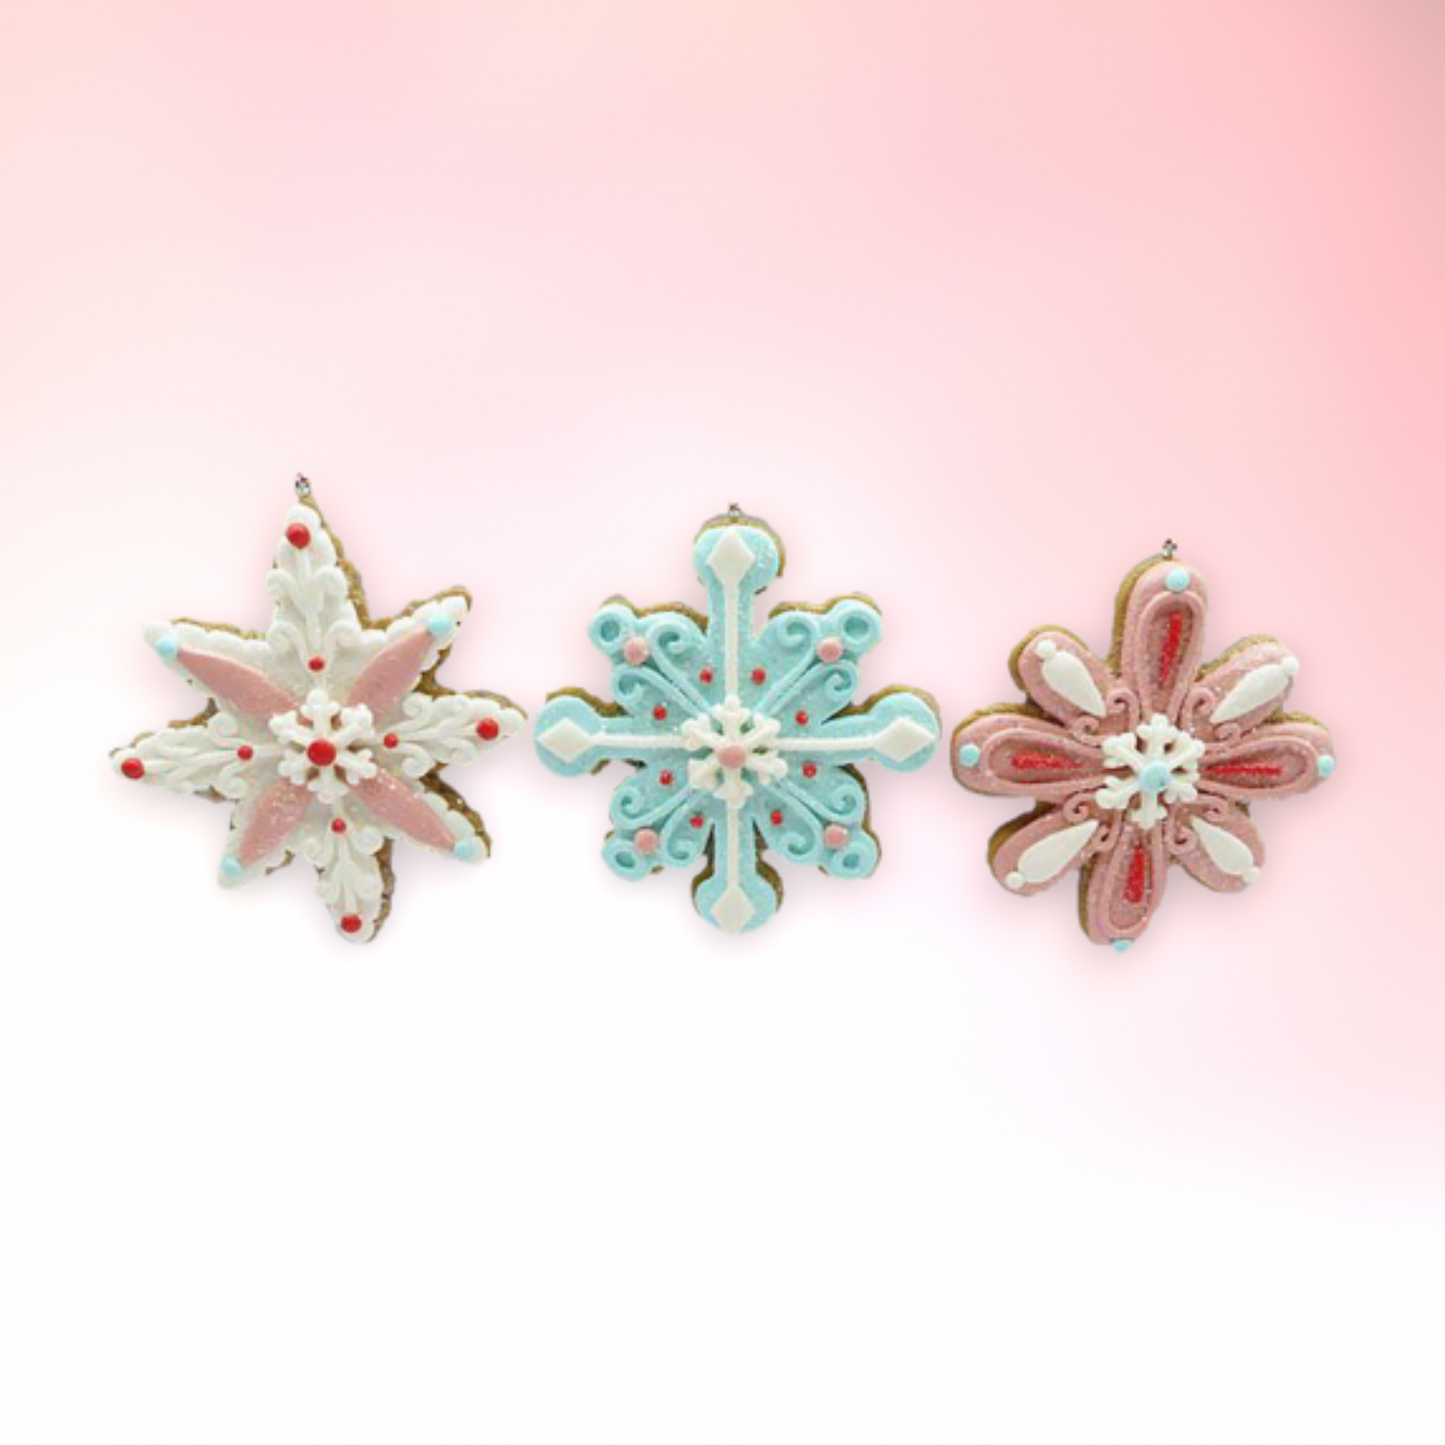 Candy Cookie Snowflakes Ornaments